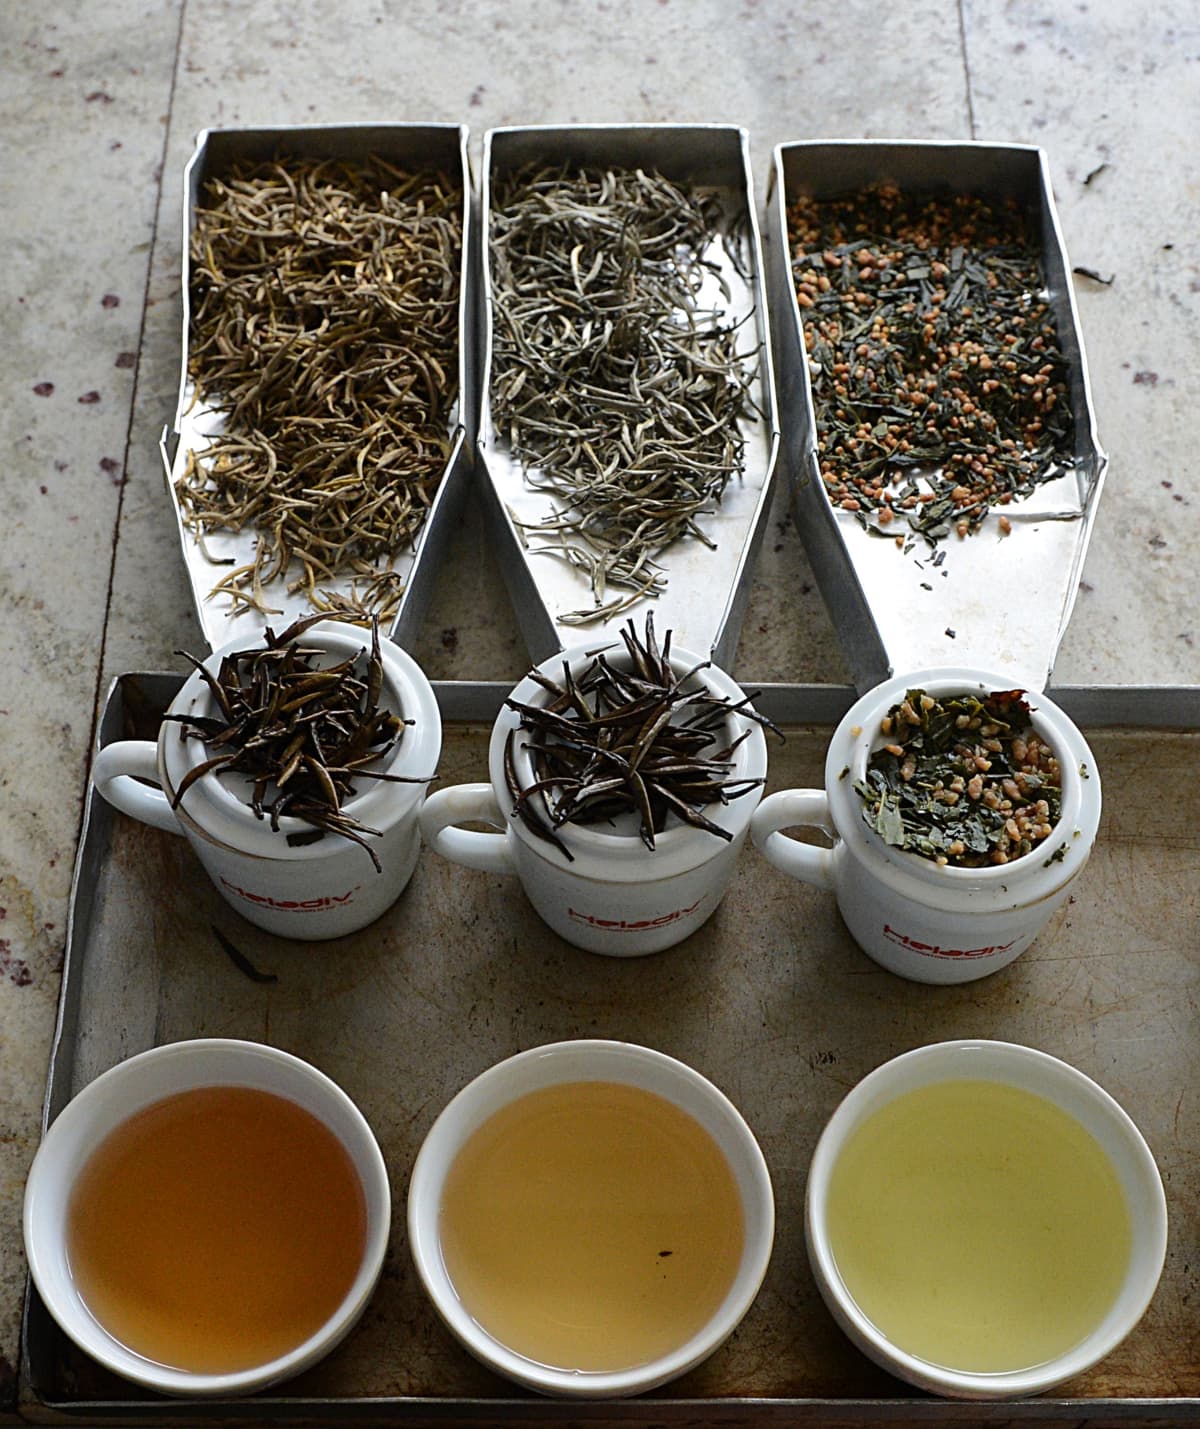 TO GO WITH Sri Lanka-tea-commodities-lifestyle-sex,FEATURE by Amal Jayasinghe
In a picture taken on March 14, 2013, Sri Lanka's exotic Golden Tips (L) and Silver Tips (C) and a Japanese Sencha (R) tea brewed on display at a factory in Kandana on the outskirts of Colombo.  A hot cup of Ceylon tea is better known as being soothing and relaxing, but Sri Lanka is now marketing its most profitable export as a luxury boost for the libido.    AFP PHOTO/Ishara S. KODIKARA        (Photo credit should read Ishara S.KODIKARA/AFP via Getty Images)